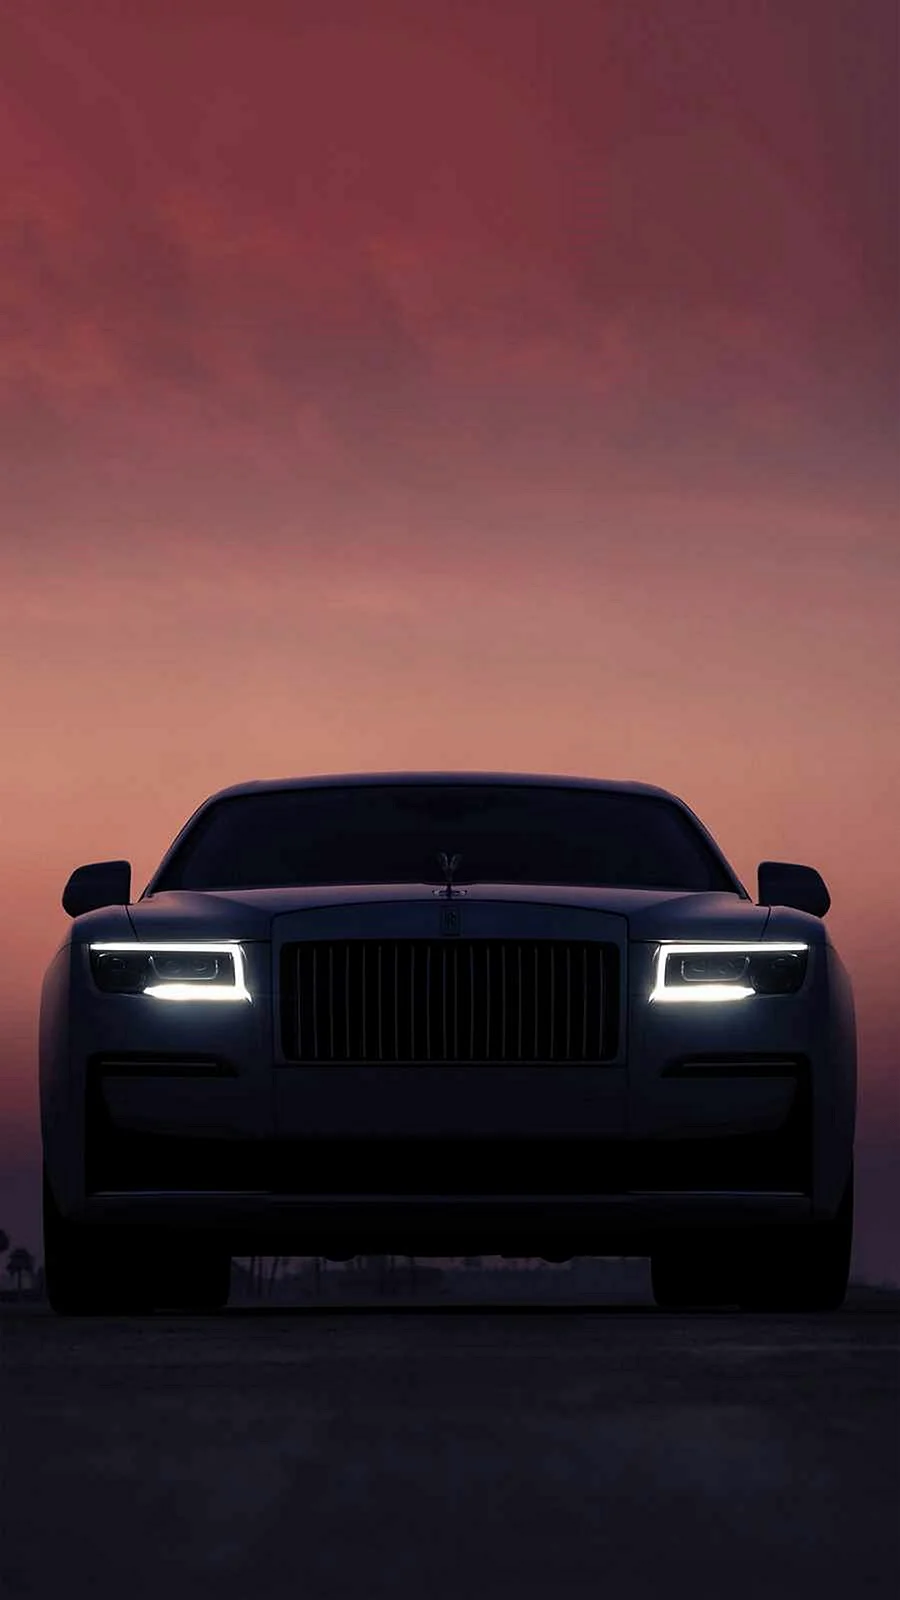 Black Rolls Ghost 2022 Phone Wallpaper For iPhone